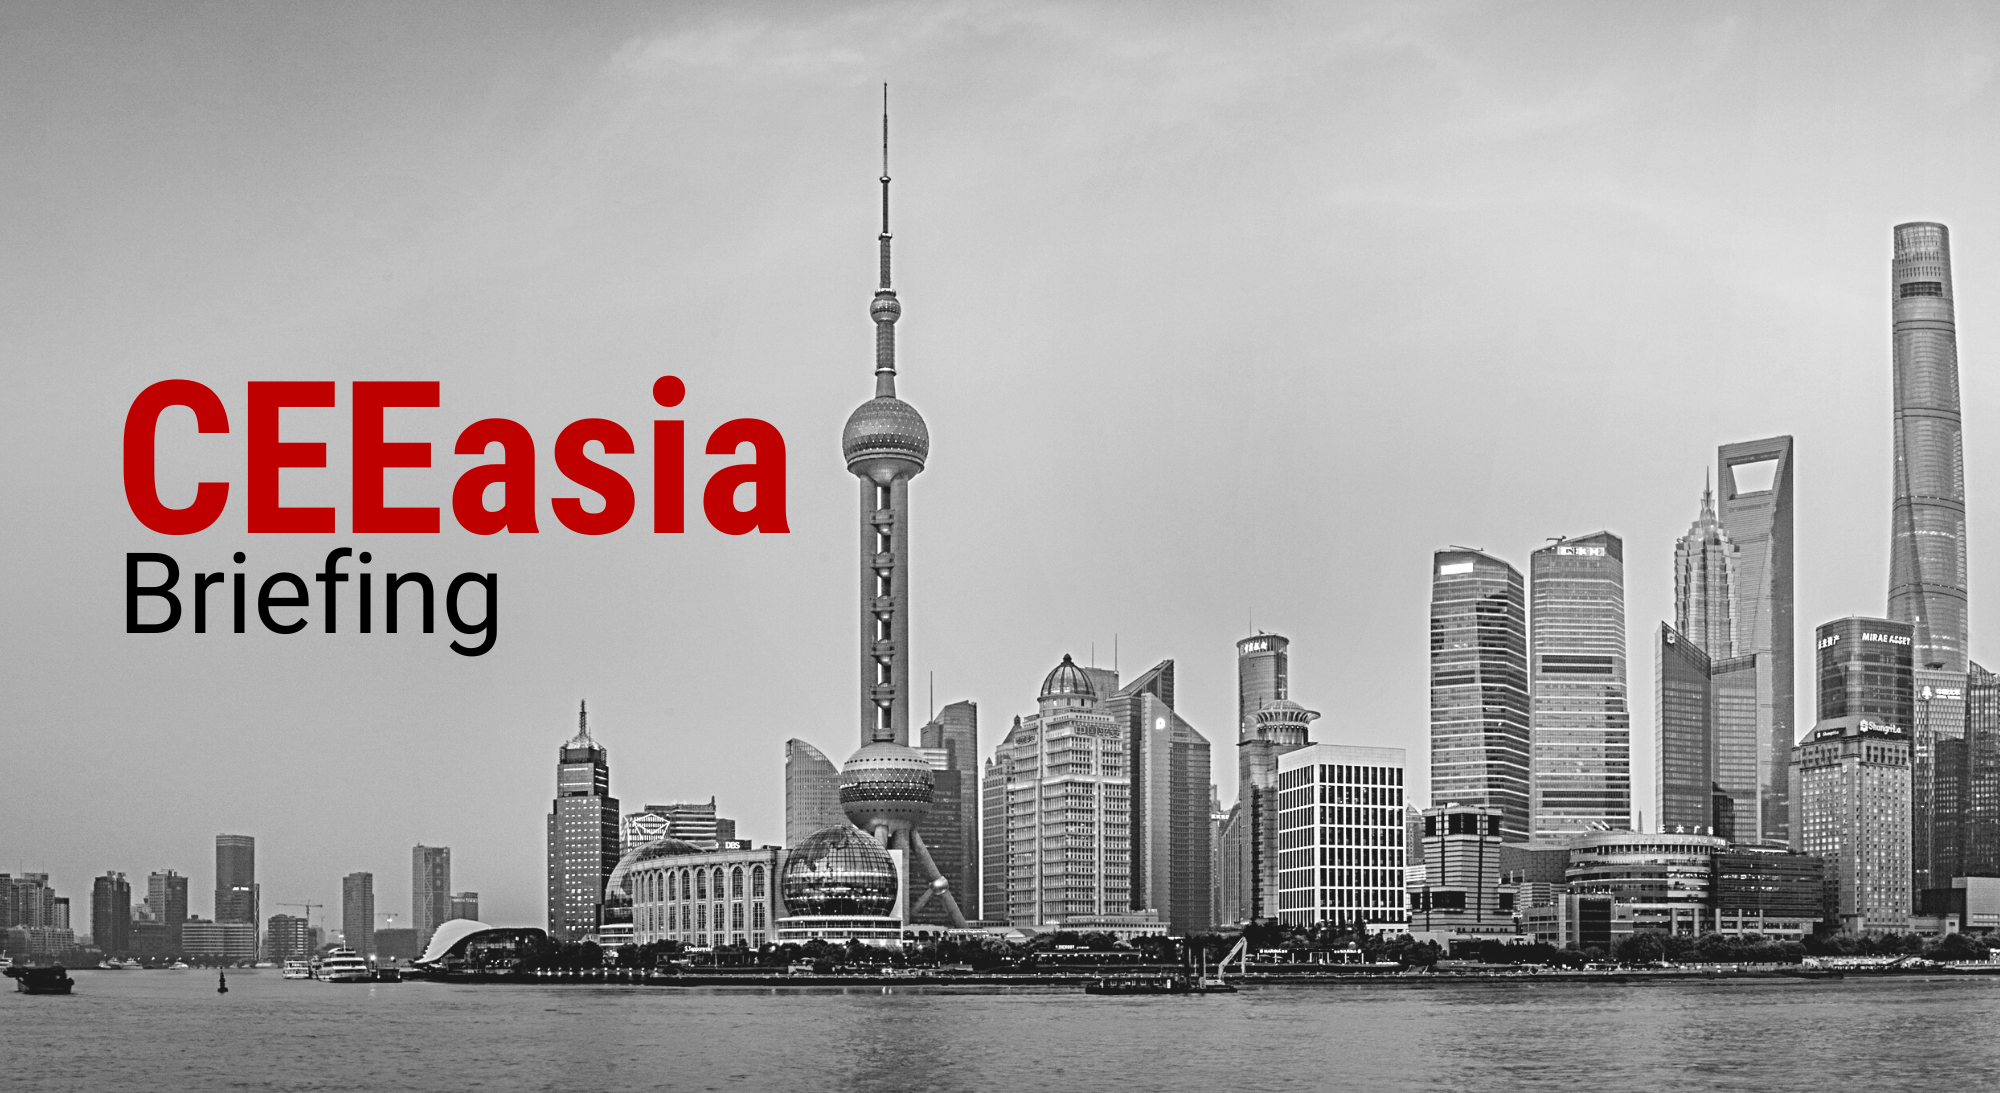 CEEasia Briefing #6: West’s approach towards China, Taiwan sparks tensions between Czechia and China, Japan & the EU during COVID-19, Tackling double taxation between Asia and CEE